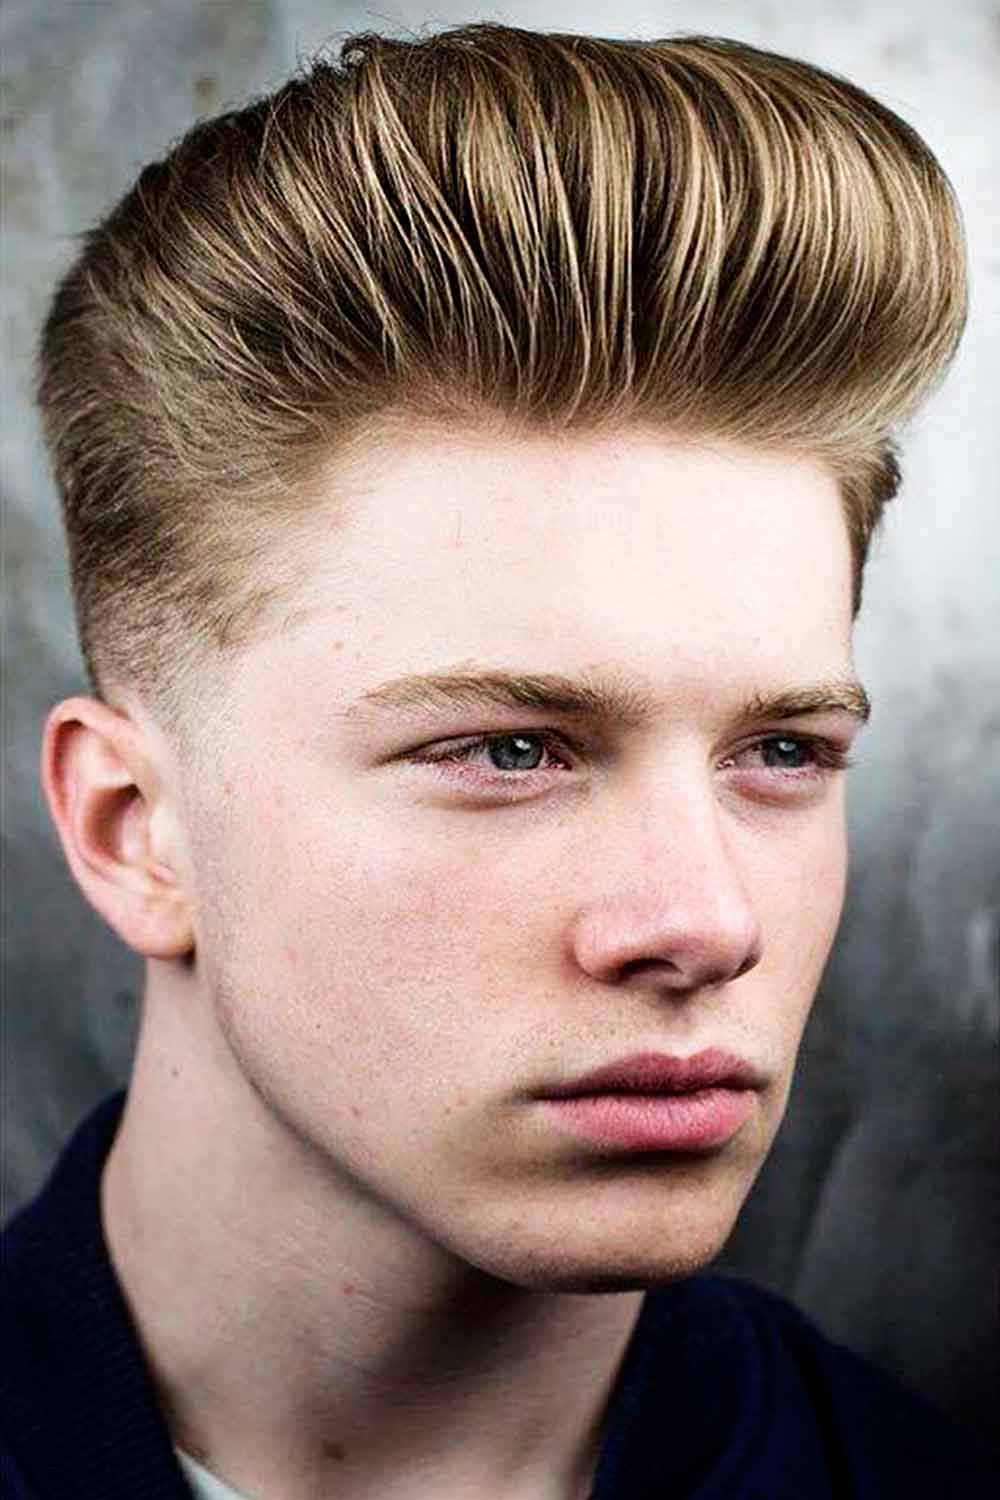 Pompadour Fade #promhairstyles #promhairstylesformen #formalhairstyles #mensformalhairstyles